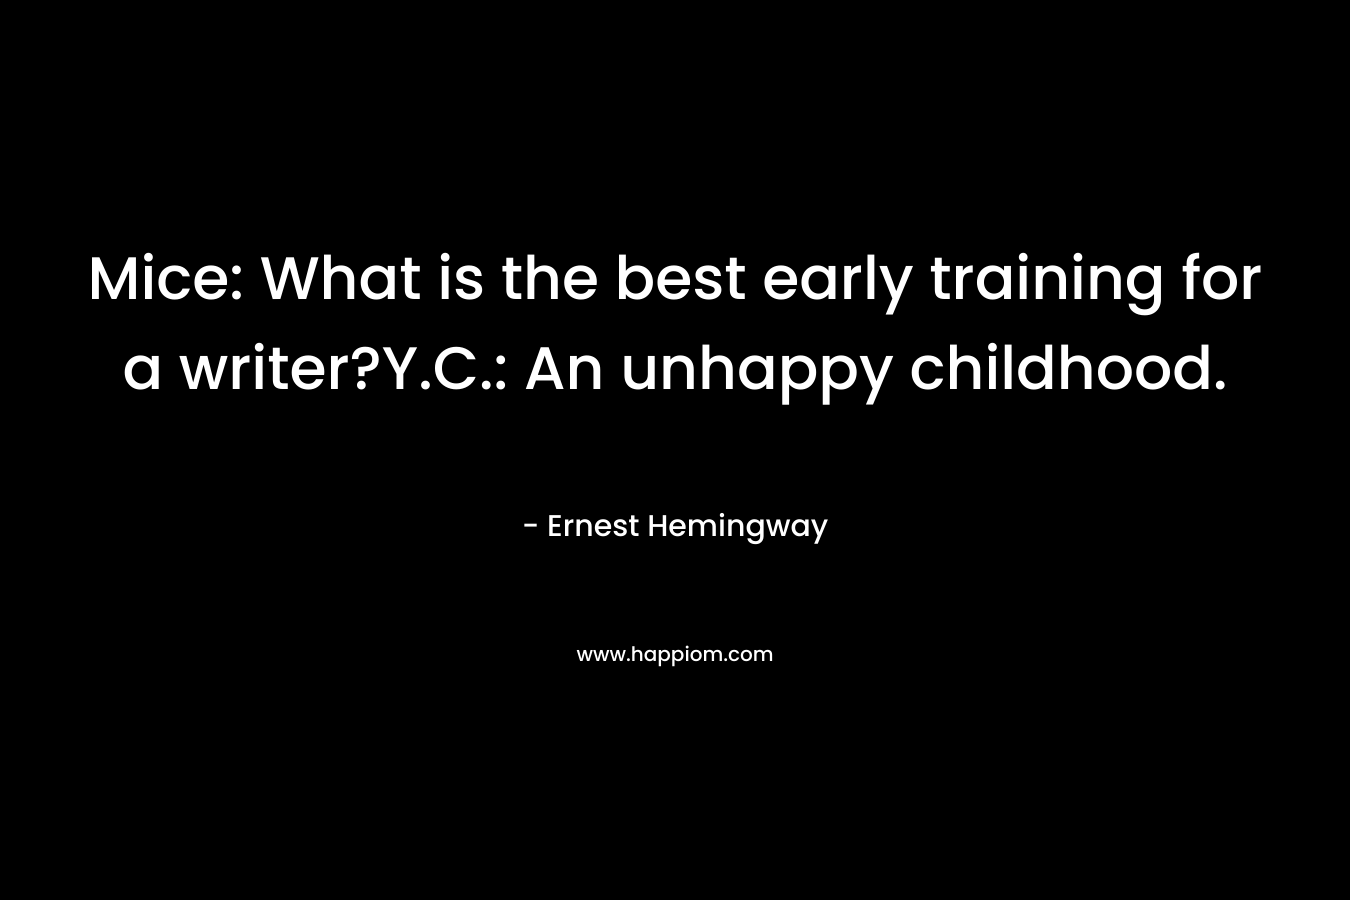 Mice: What is the best early training for a writer?Y.C.: An unhappy childhood. – Ernest Hemingway